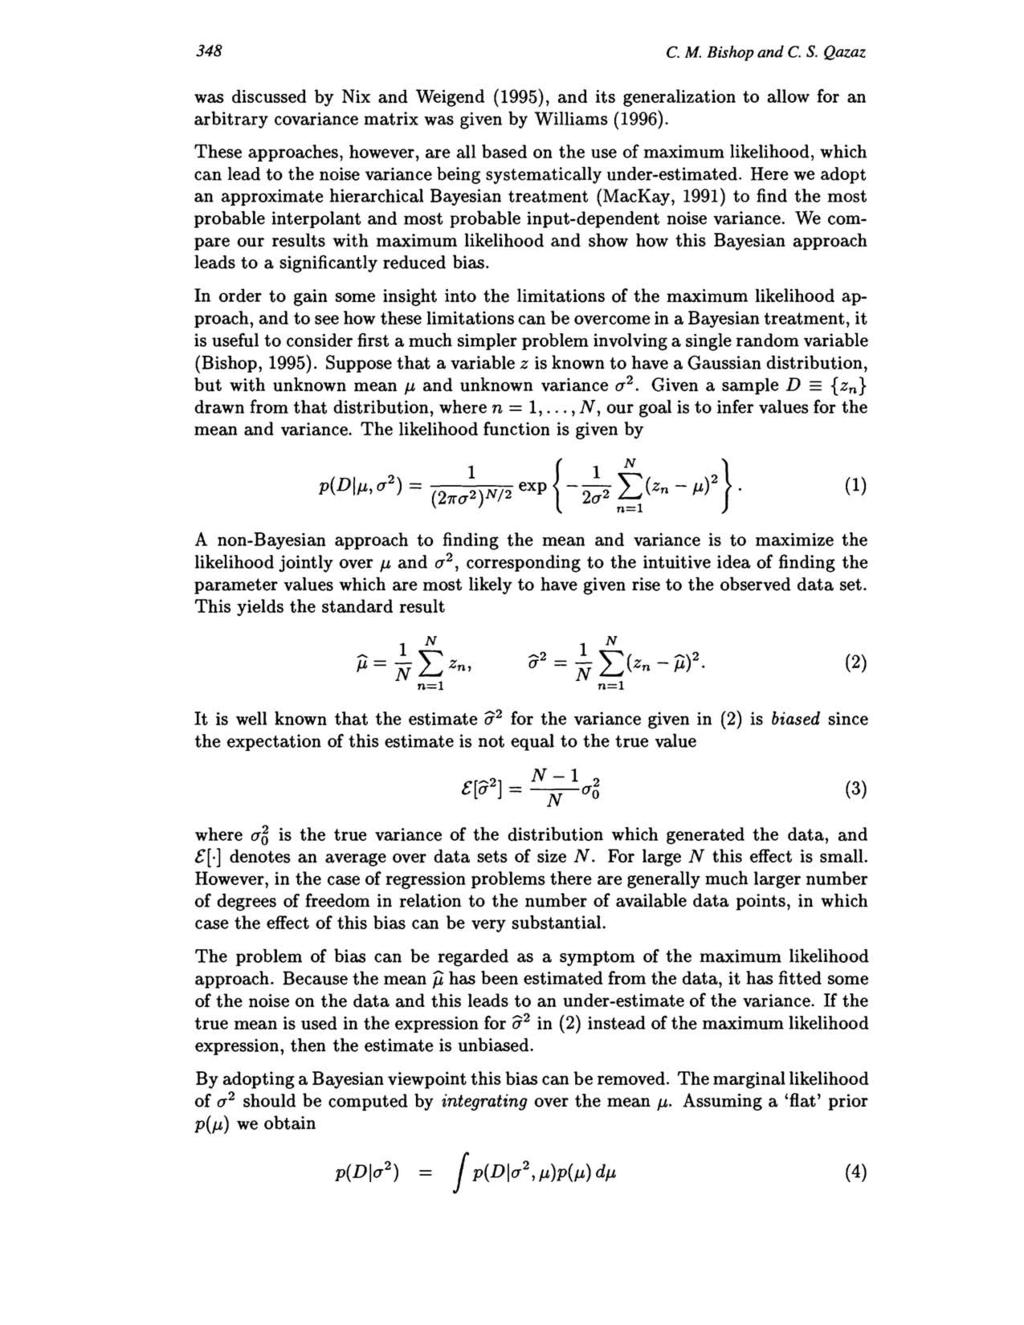 348 C. M. Bishop and C. S. Qazaz was discussed by i and Weigend (1995), and its generalization to allow for an arbitrary covariance matri was given by Williams (1996).